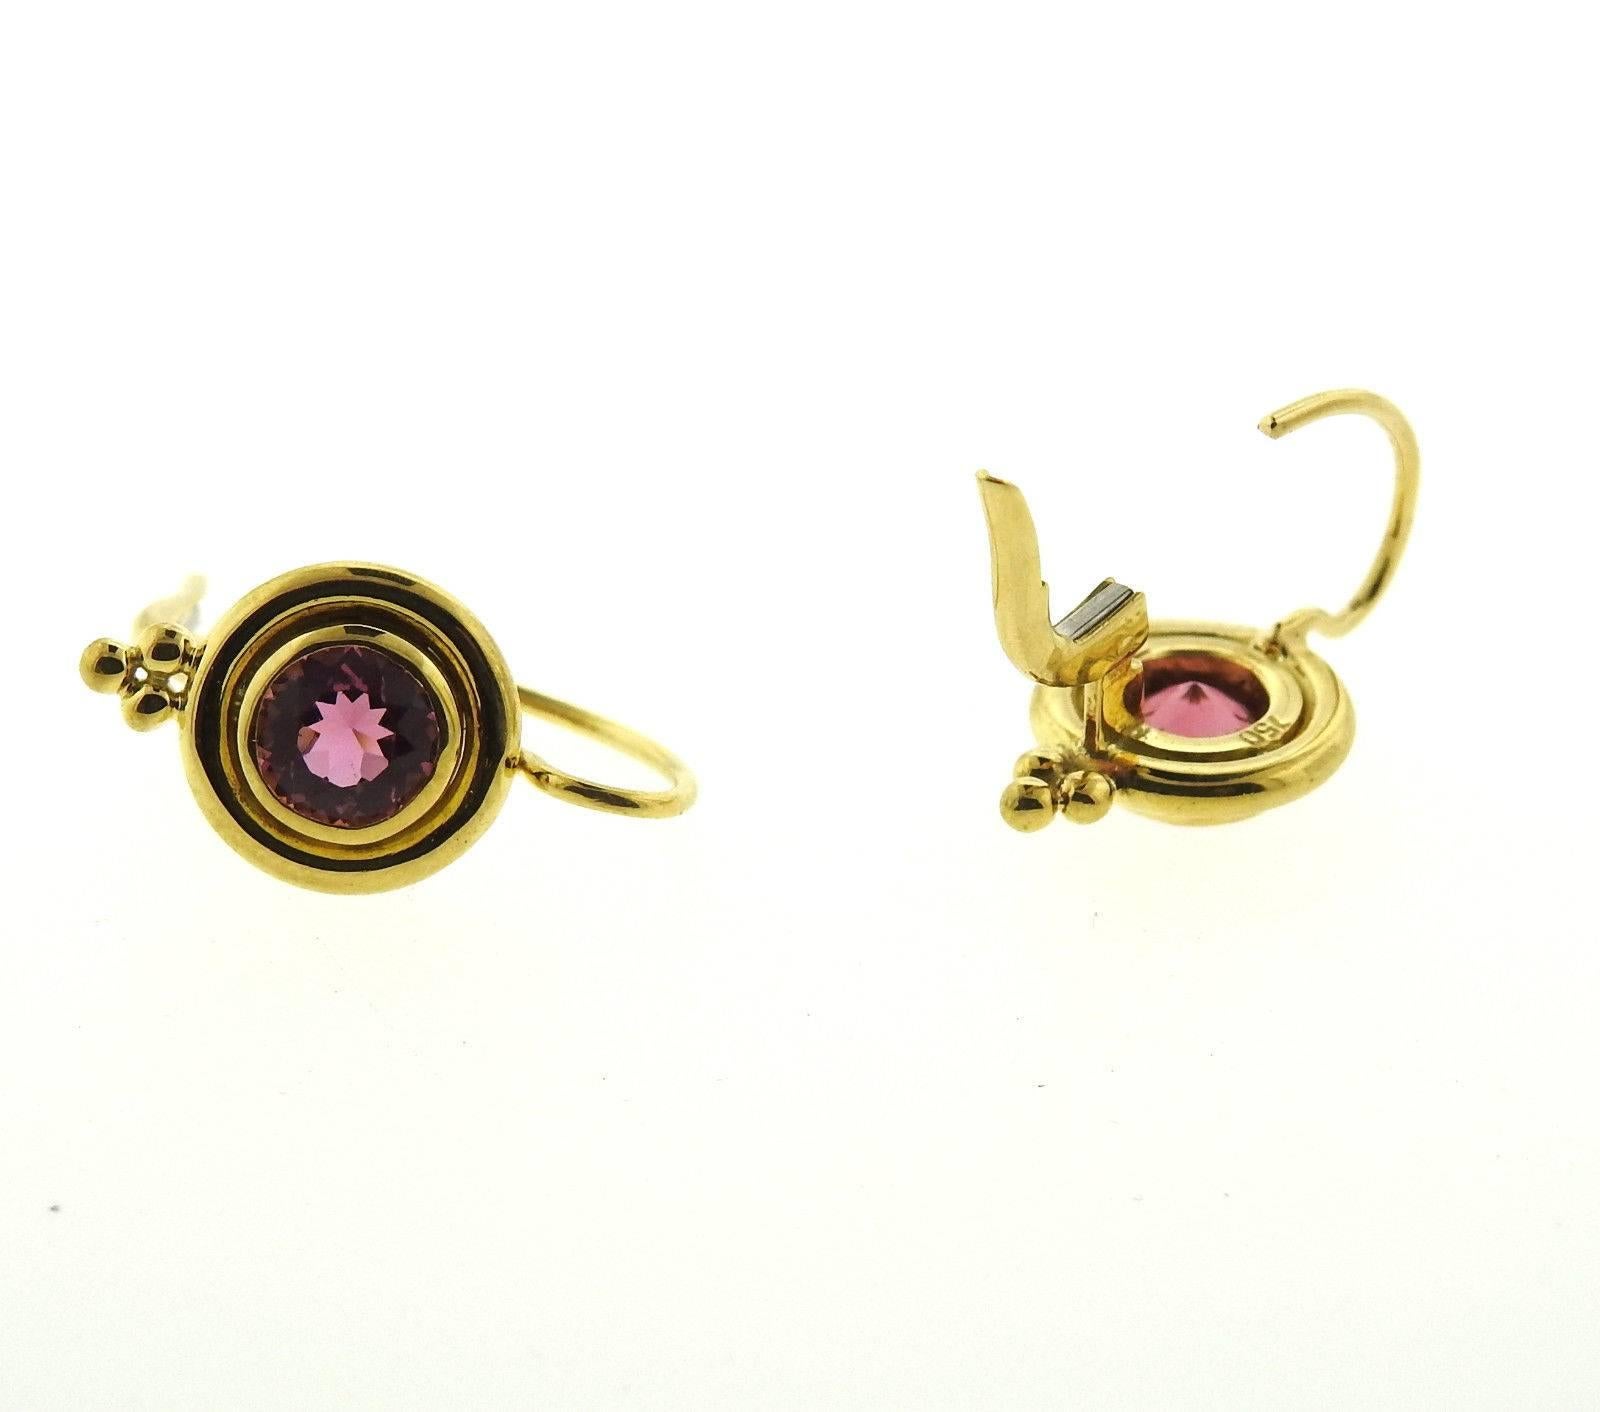 A pair of 18k yellow gold earrings set with pink tourmalines.  The earrings measure 19mm x 10mm and weigh 5.4 grams.  Marked: Temple mark, 750.  The earrings currently retail $2300.